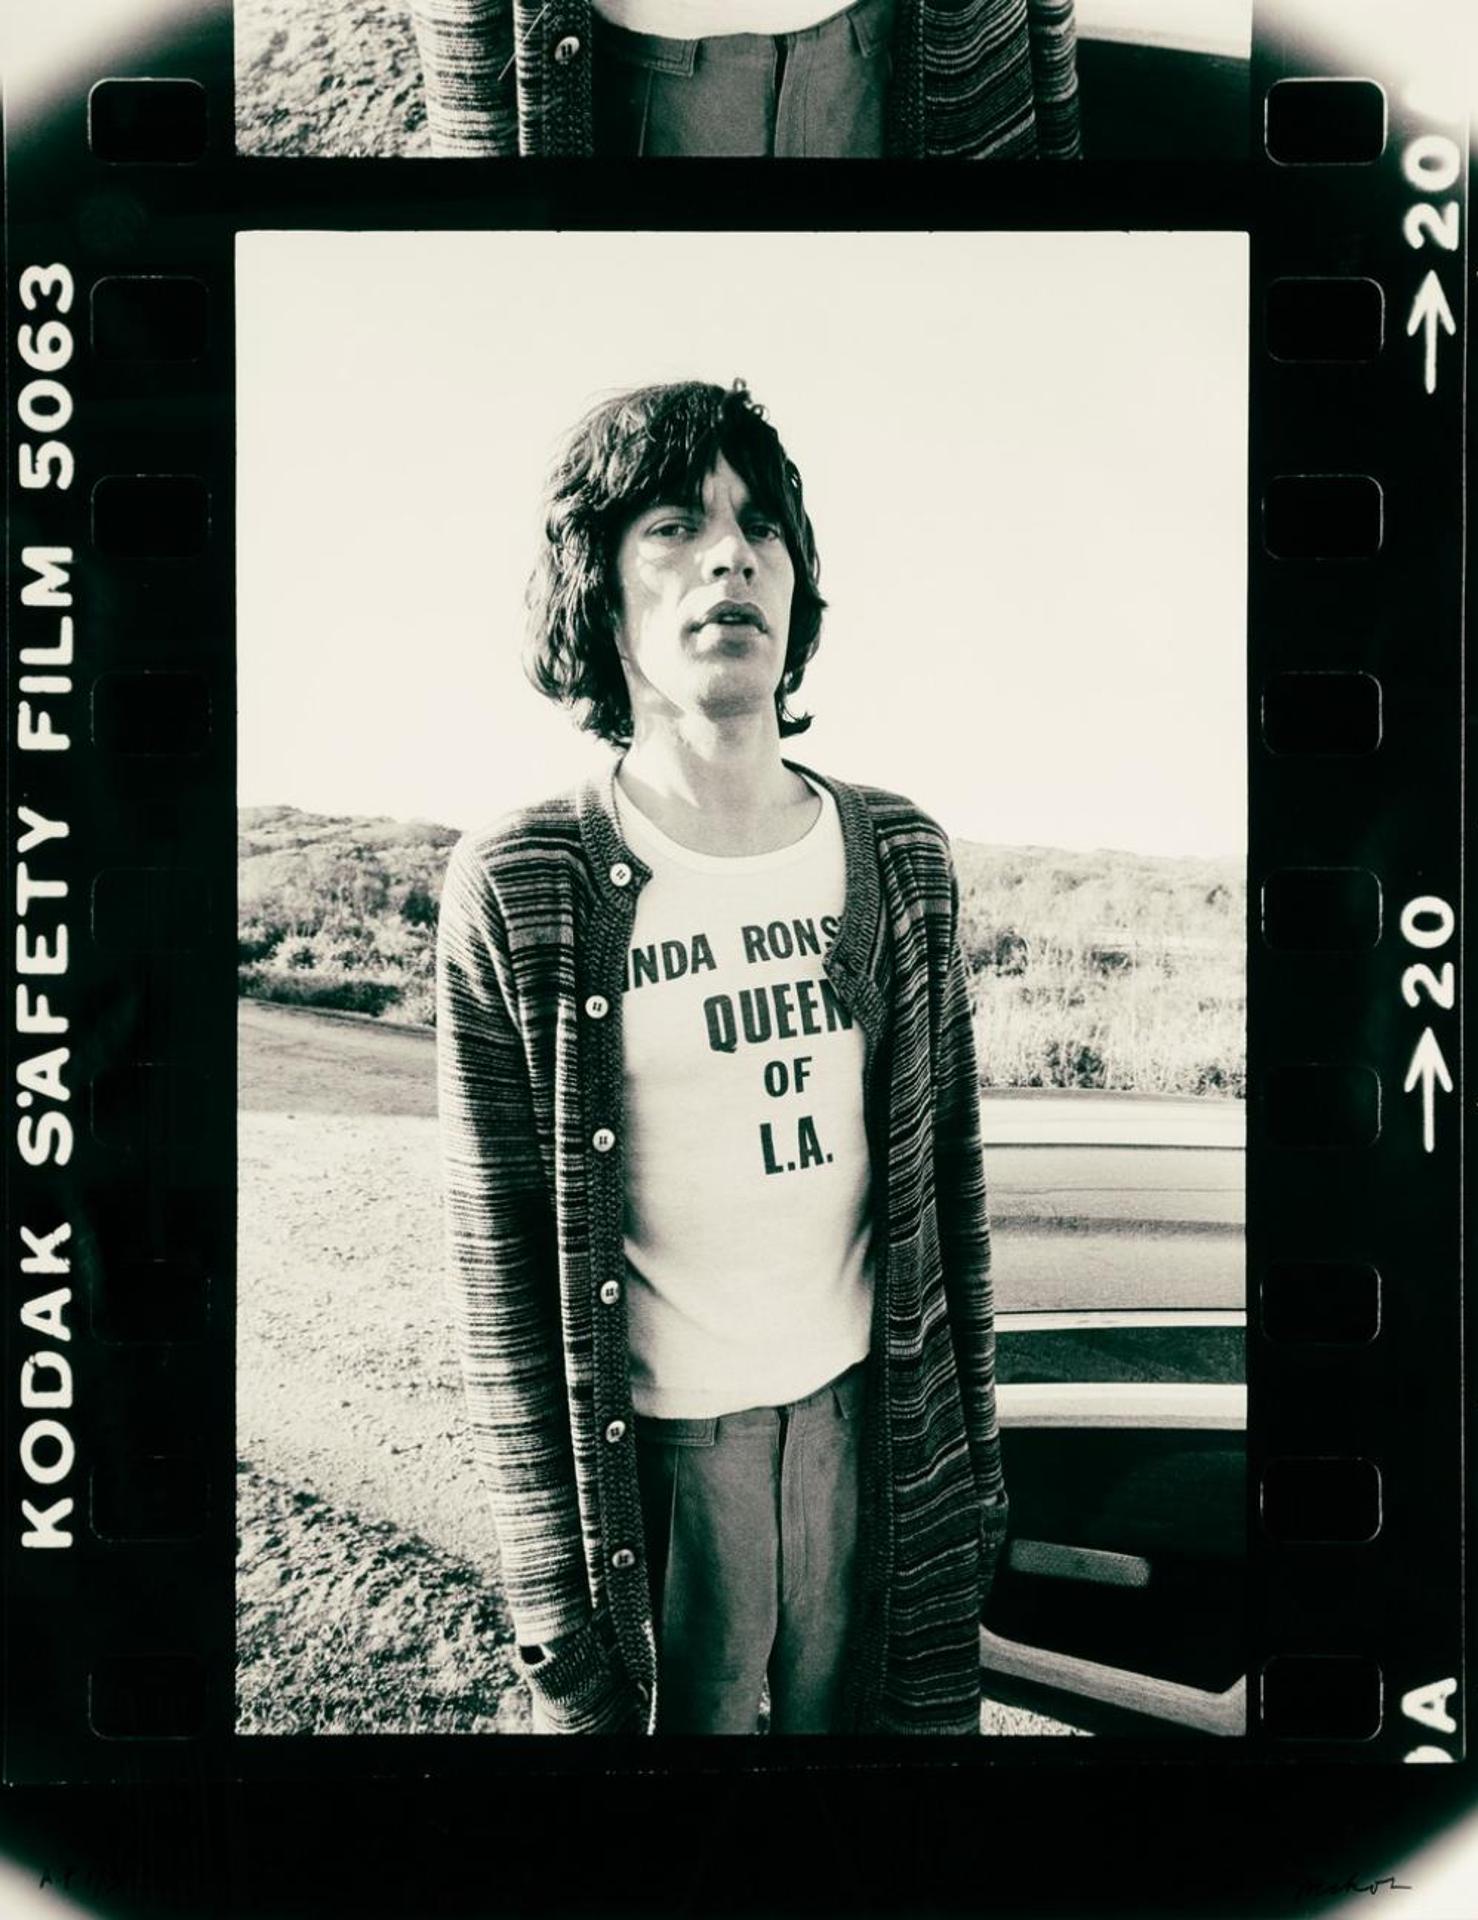 Christopher Makos (1948) - Mick Jagger in Montauk 1977 (with sprockets)